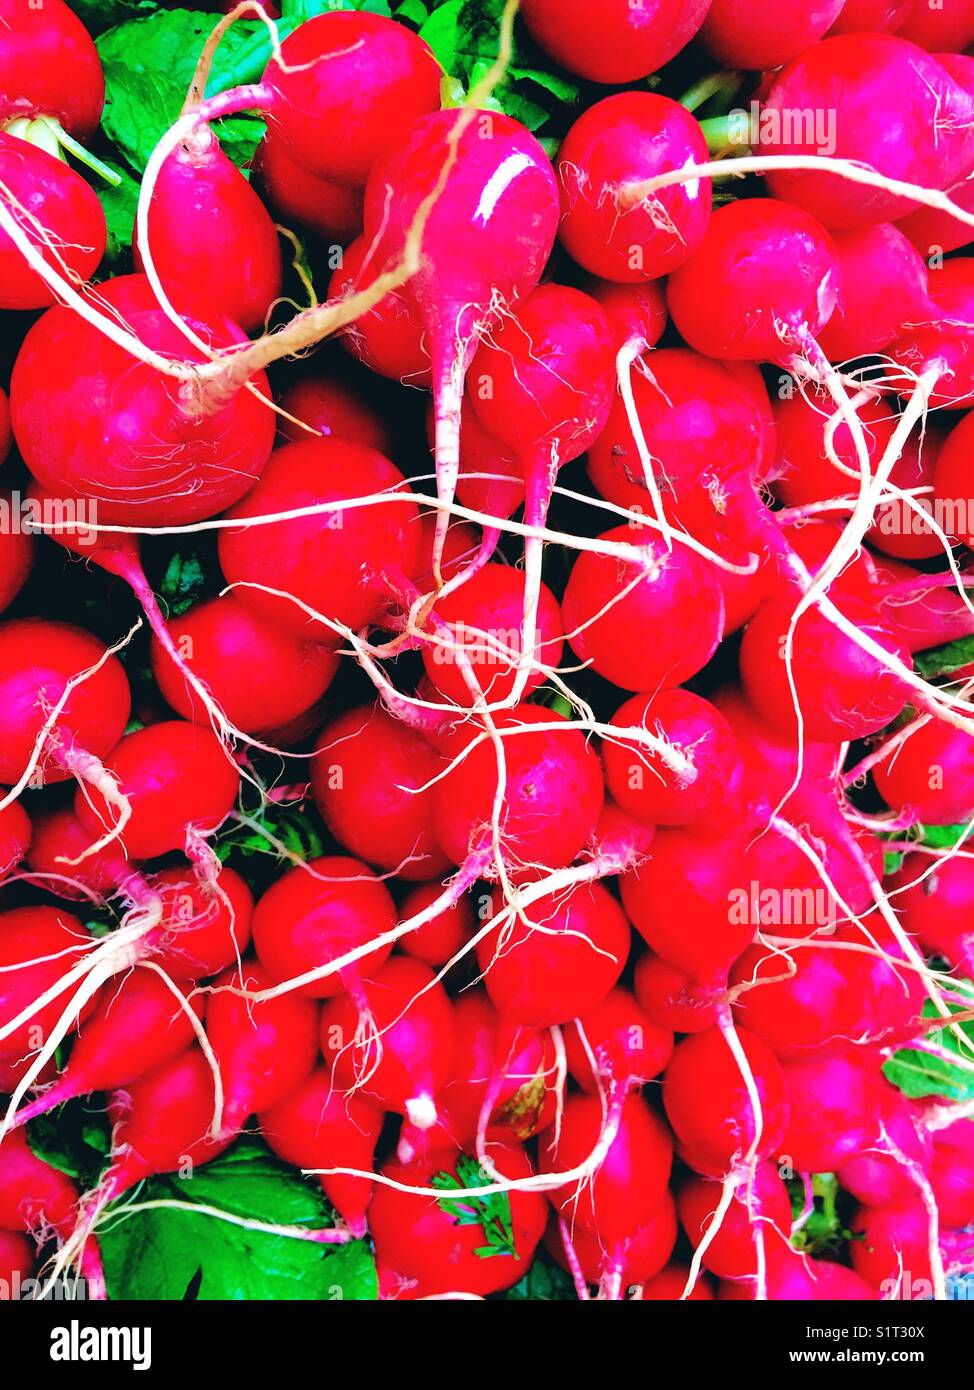 Glowing Red radishes with vibrant roots Stock Photo